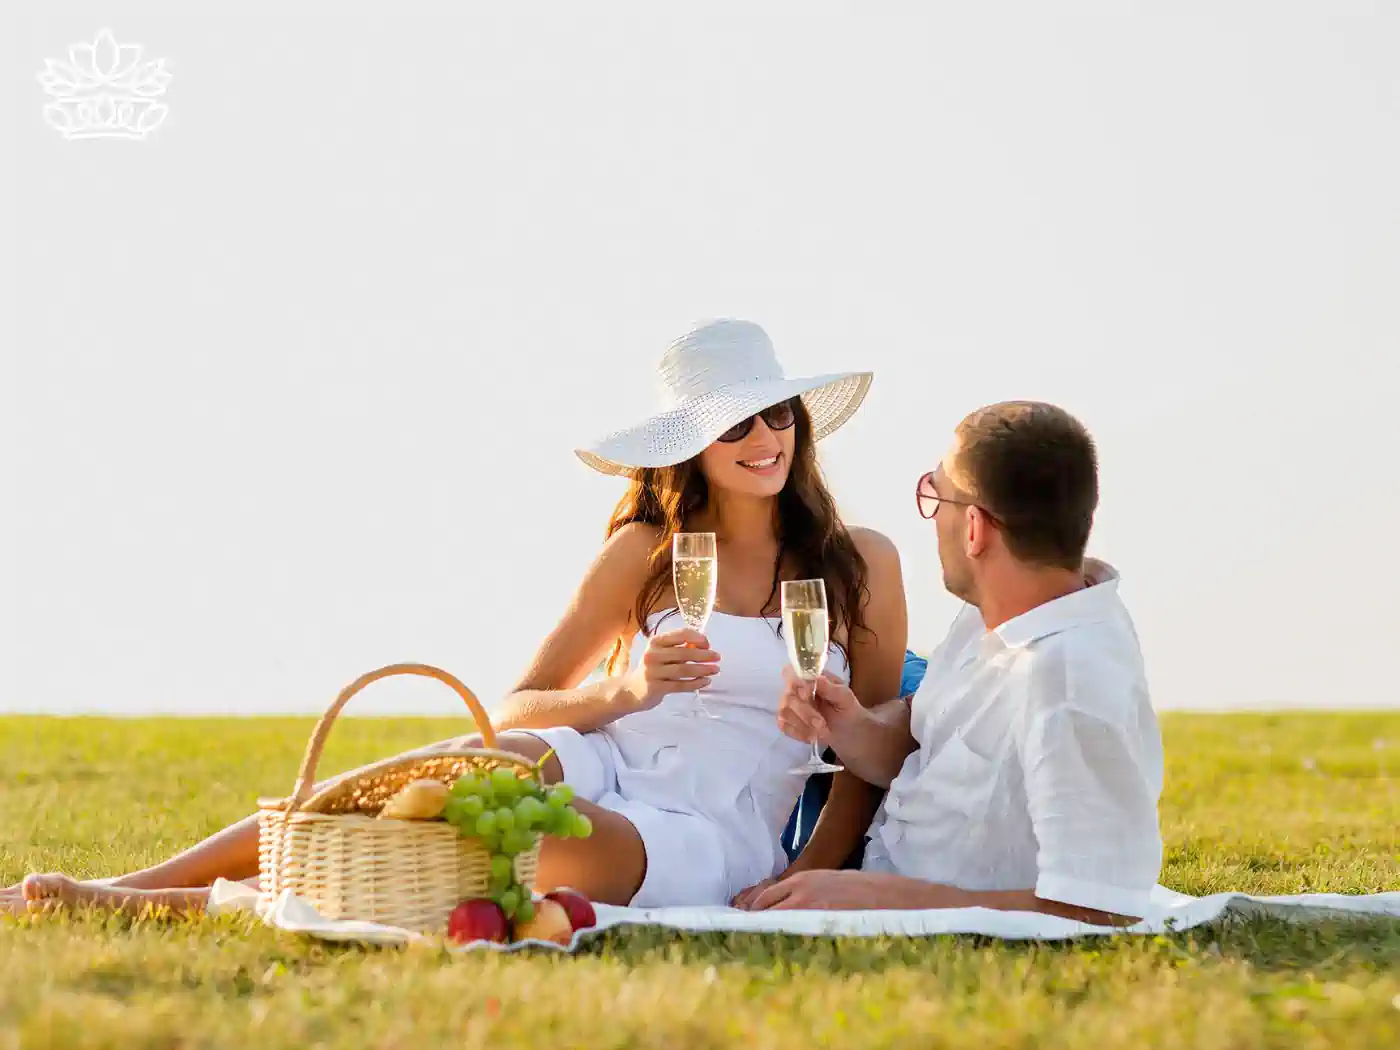  A couple enjoying a romantic picnic with a basket of grapes, apples, and champagne, sitting on a white blanket. Fabulous Flowers and Gifts - Picnic Gift Baskets Collection.